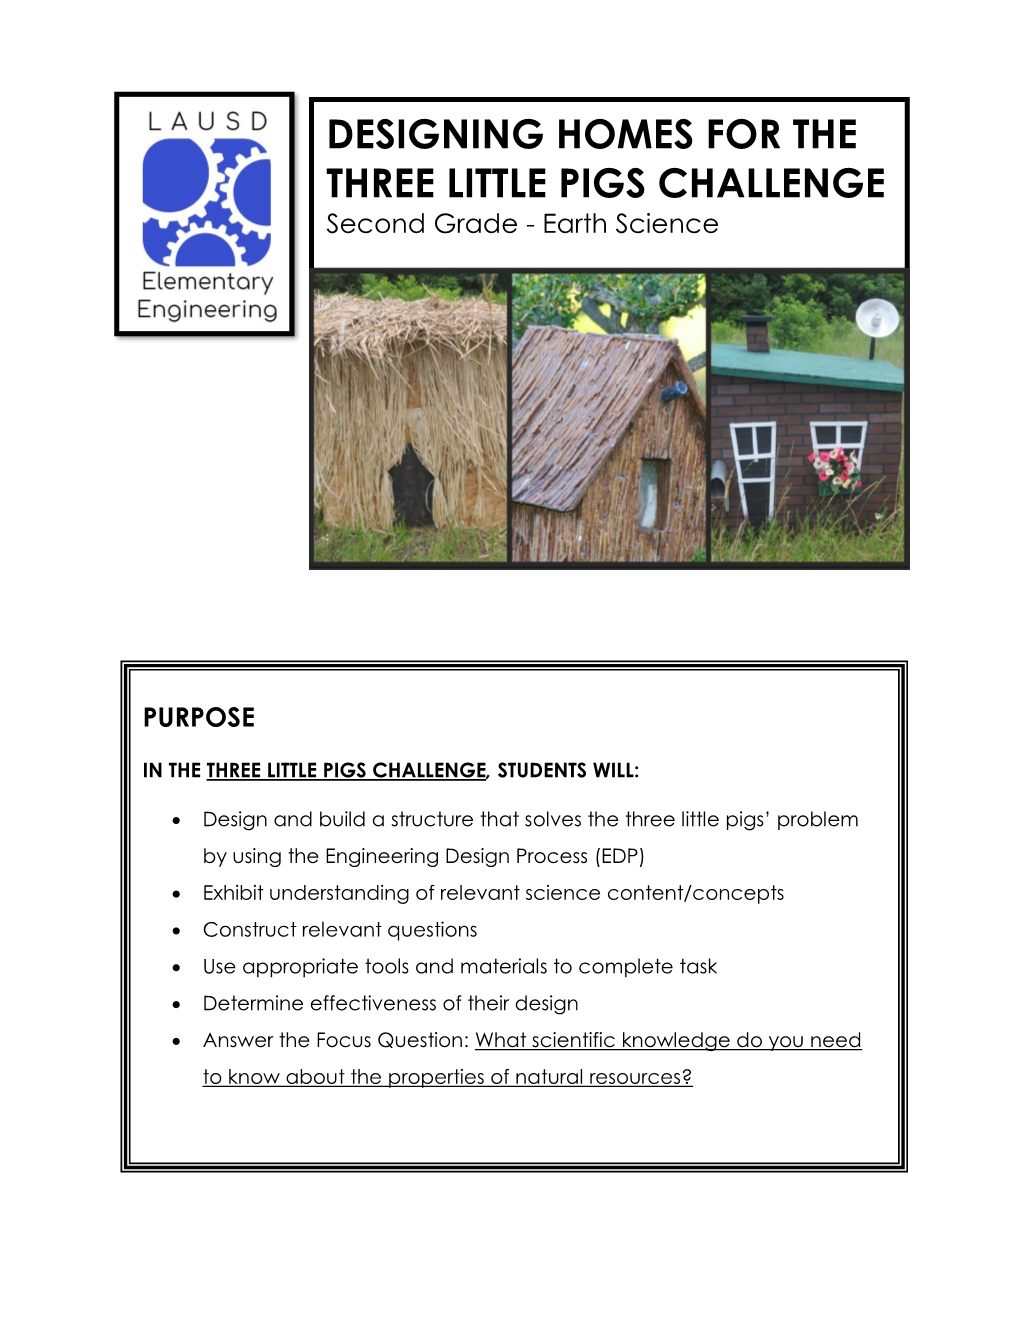 DESIGNING HOMES for the THREE LITTLE PIGS CHALLENGE Second Grade - Earth Science